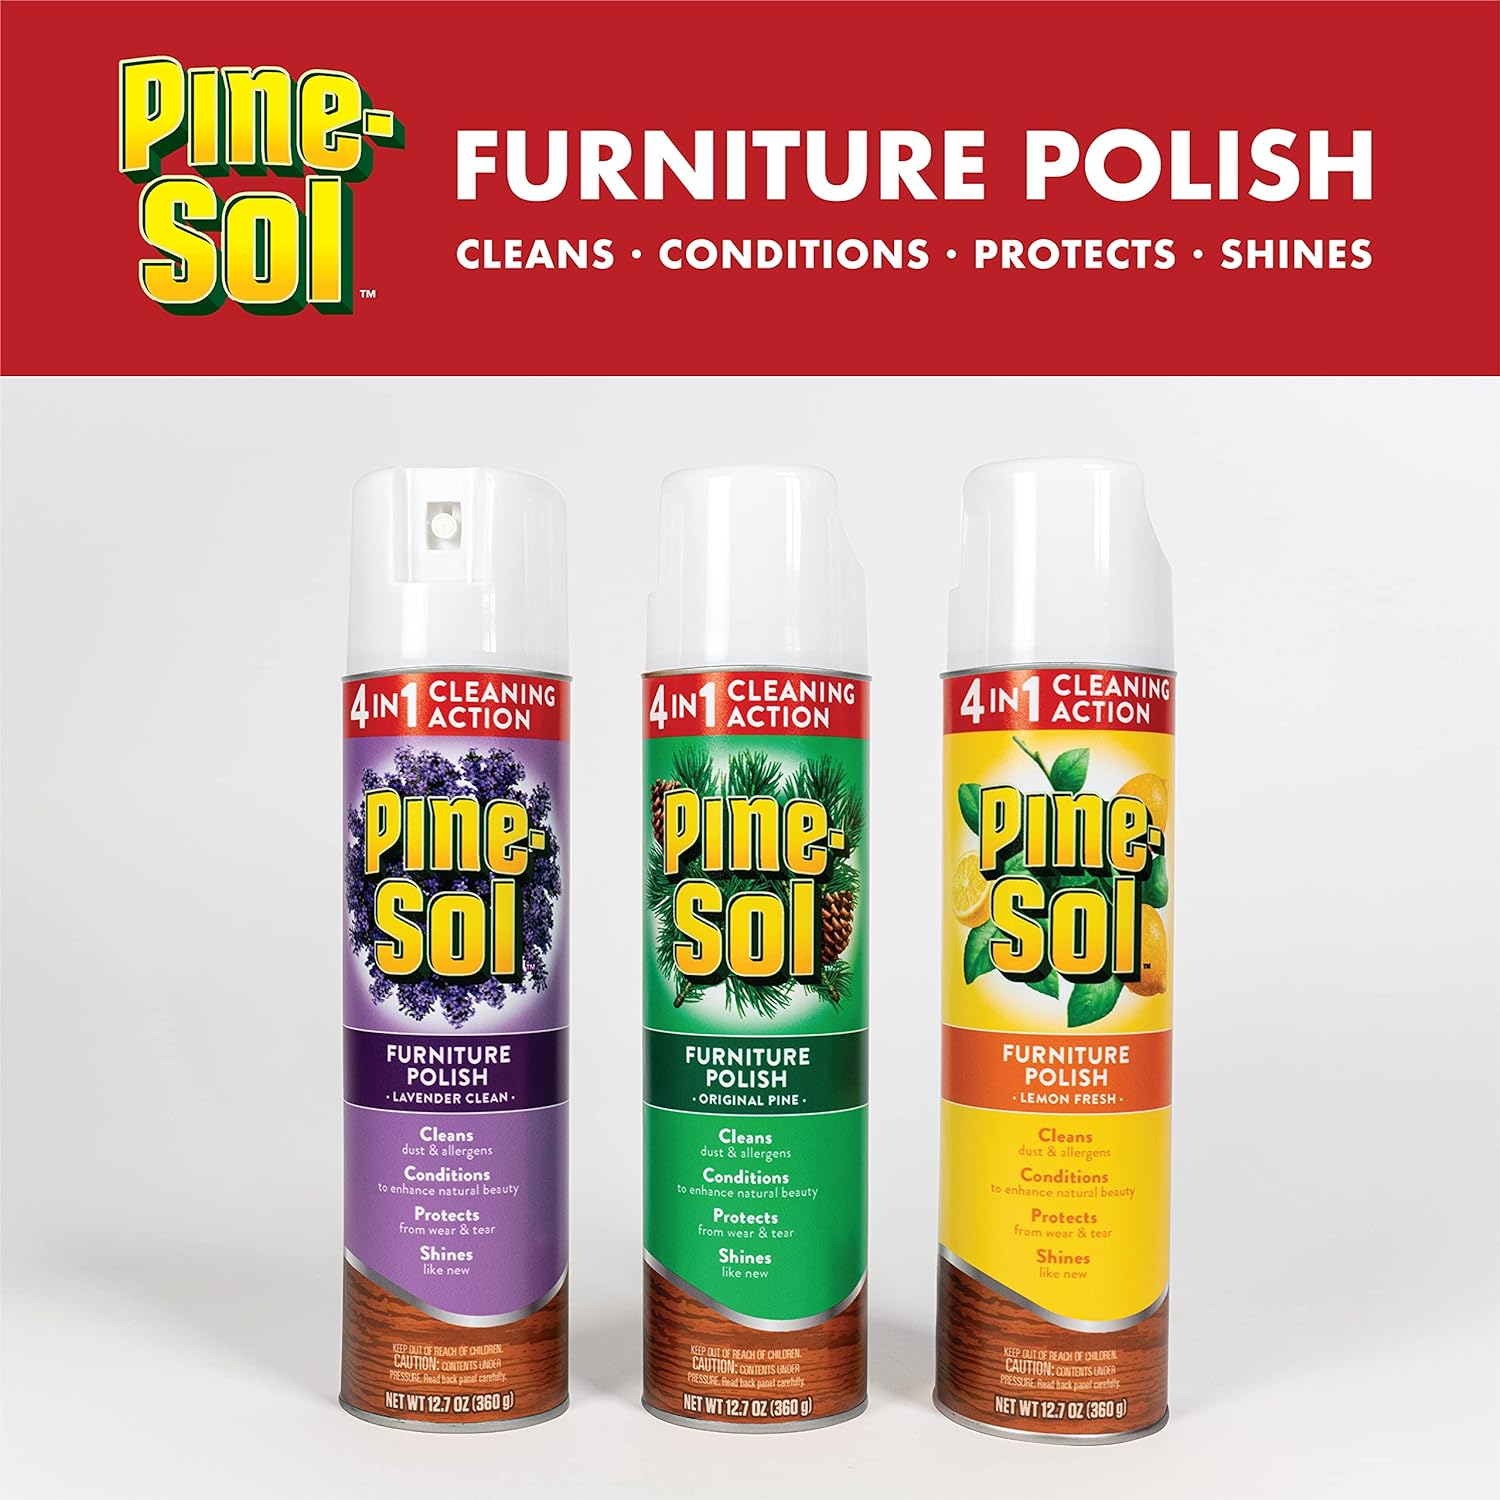 Pine-Sol Furniture Polish | Wood Furniture Polish Spray | Wood Polish Spray for Your Furniture Gives You A Powerful Clean You Can Trust | 12.7 Ounces, Fresh Lavender Scent - Pack of 6 : Health & Household